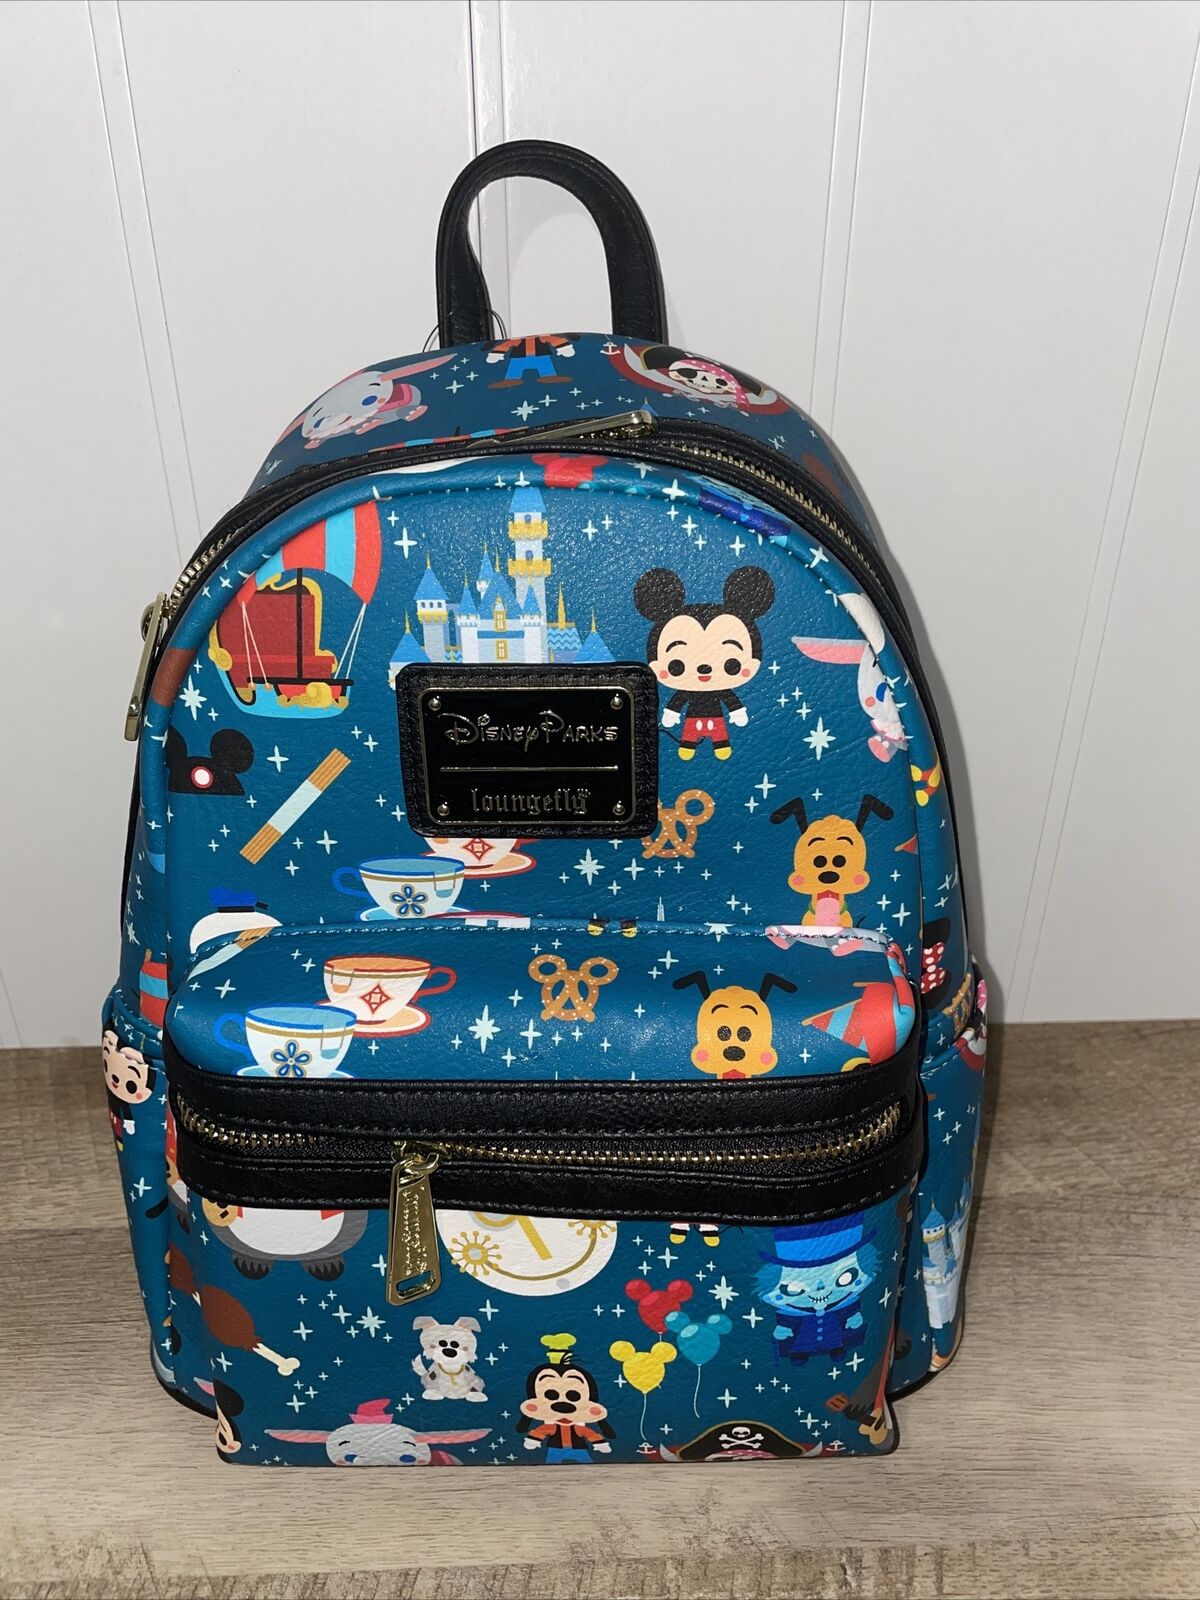 Loungefly Disney Parks Chibi Characters Attractions Mini Backpack Mickey Pretzel